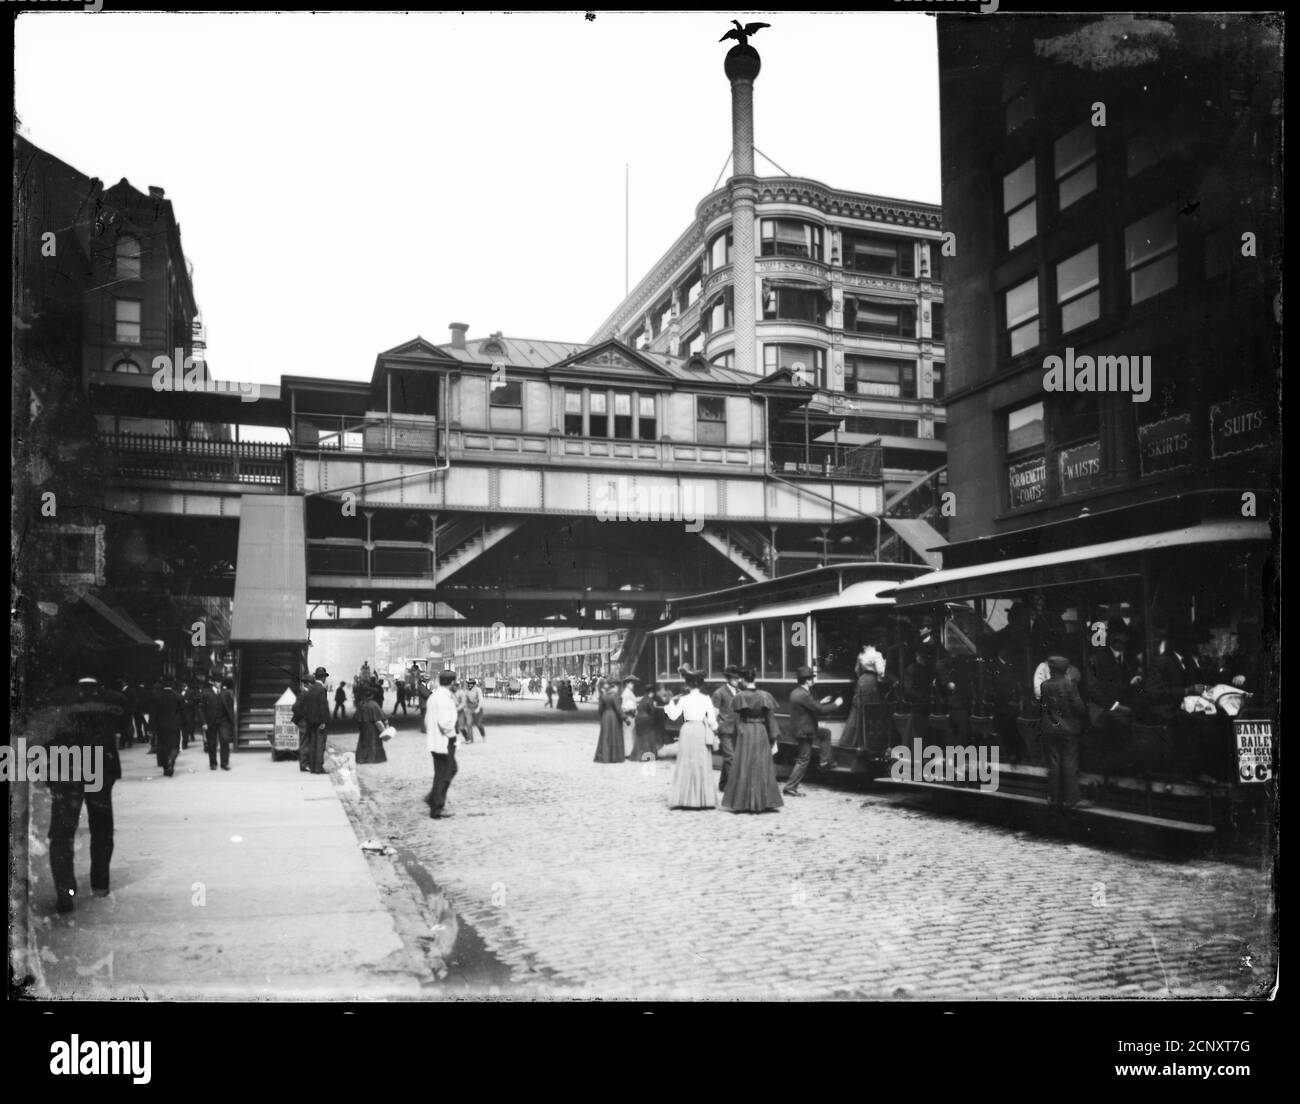 Elevated railway station at State and Van Buren Streets, Chicago, Illinois, circa 1905 Stock Photo